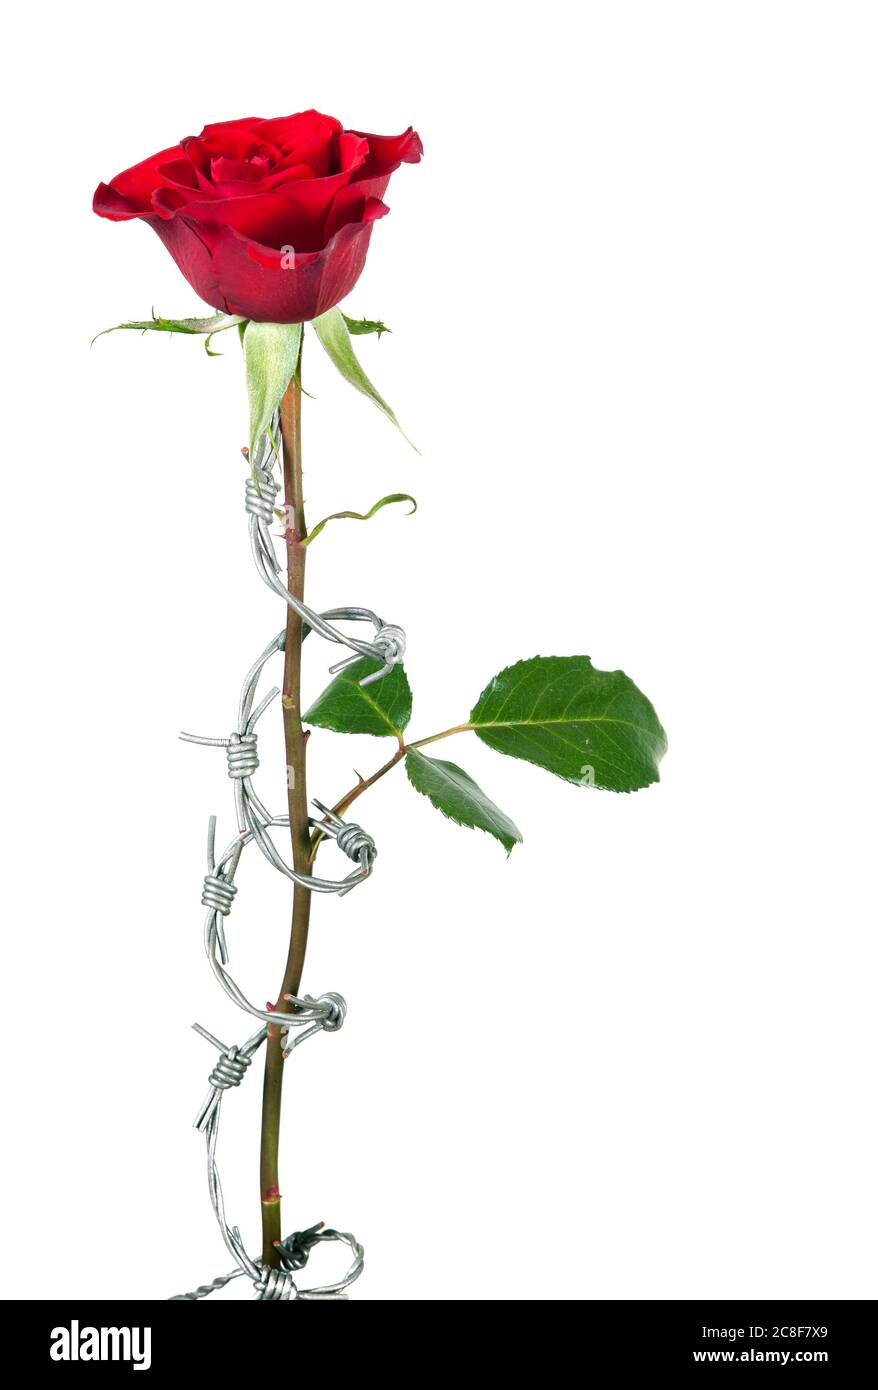 Barbed wire curling around the stem of  a red rose Stock Photo